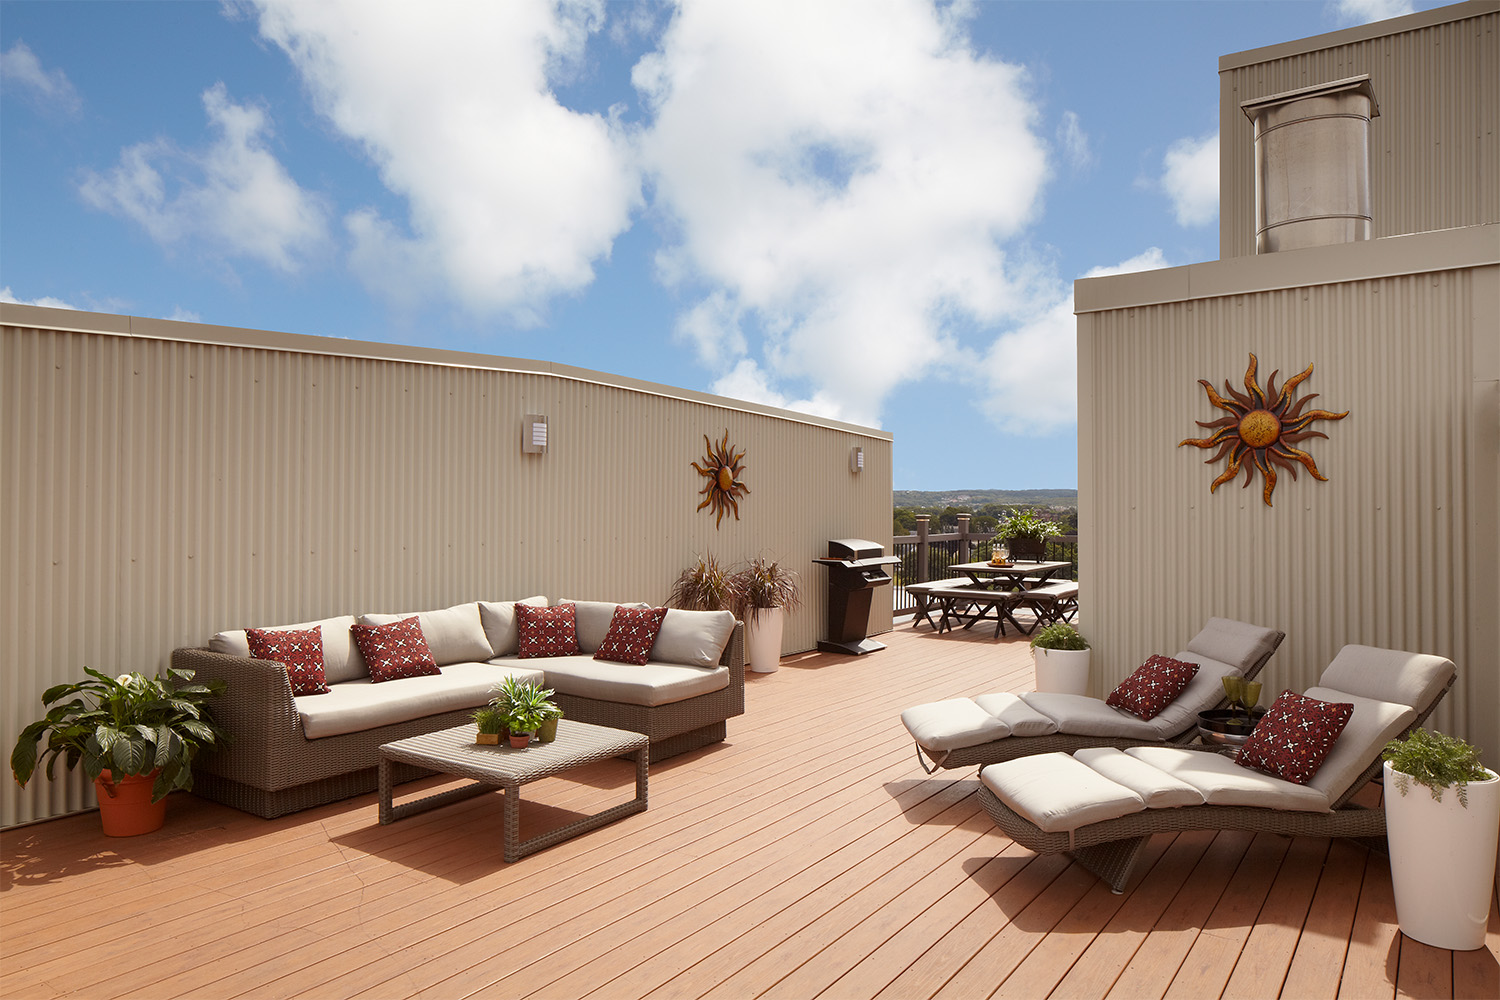 Roof deck patio with plush cream-colored lawn chairs 